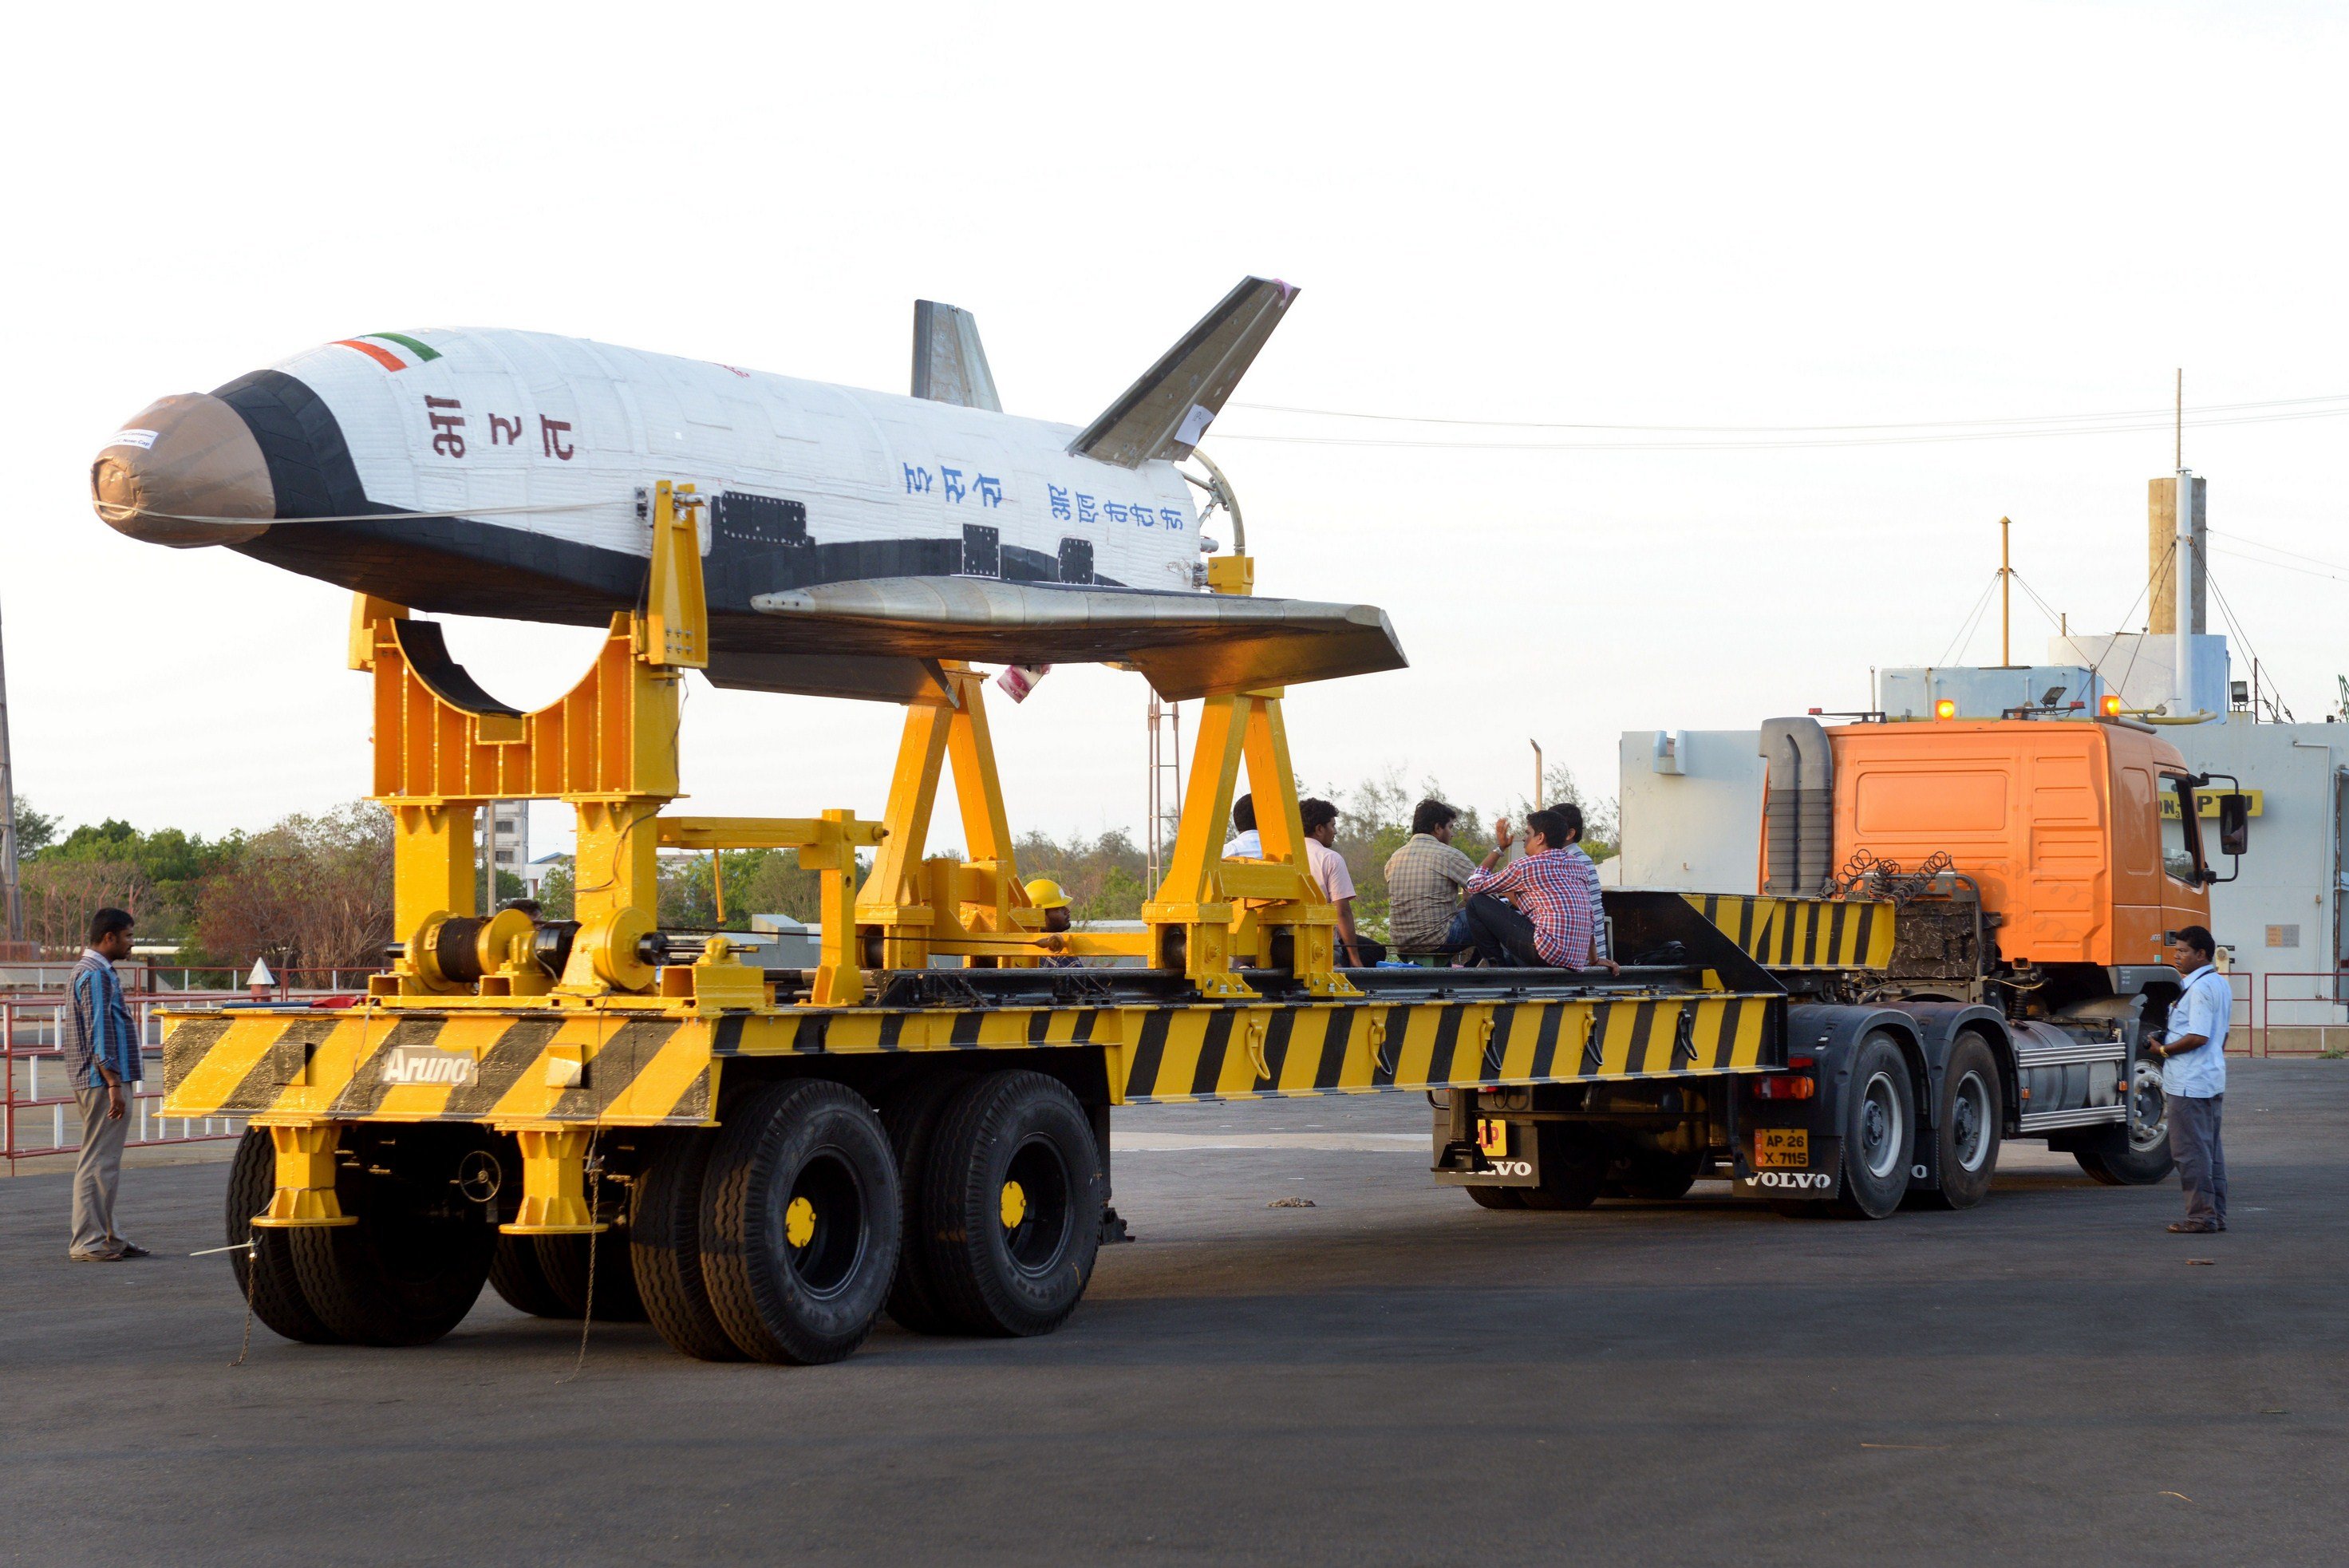 ISRO Made Us Proud Again: Launches Indias First Indigenously Made Space Shuttle